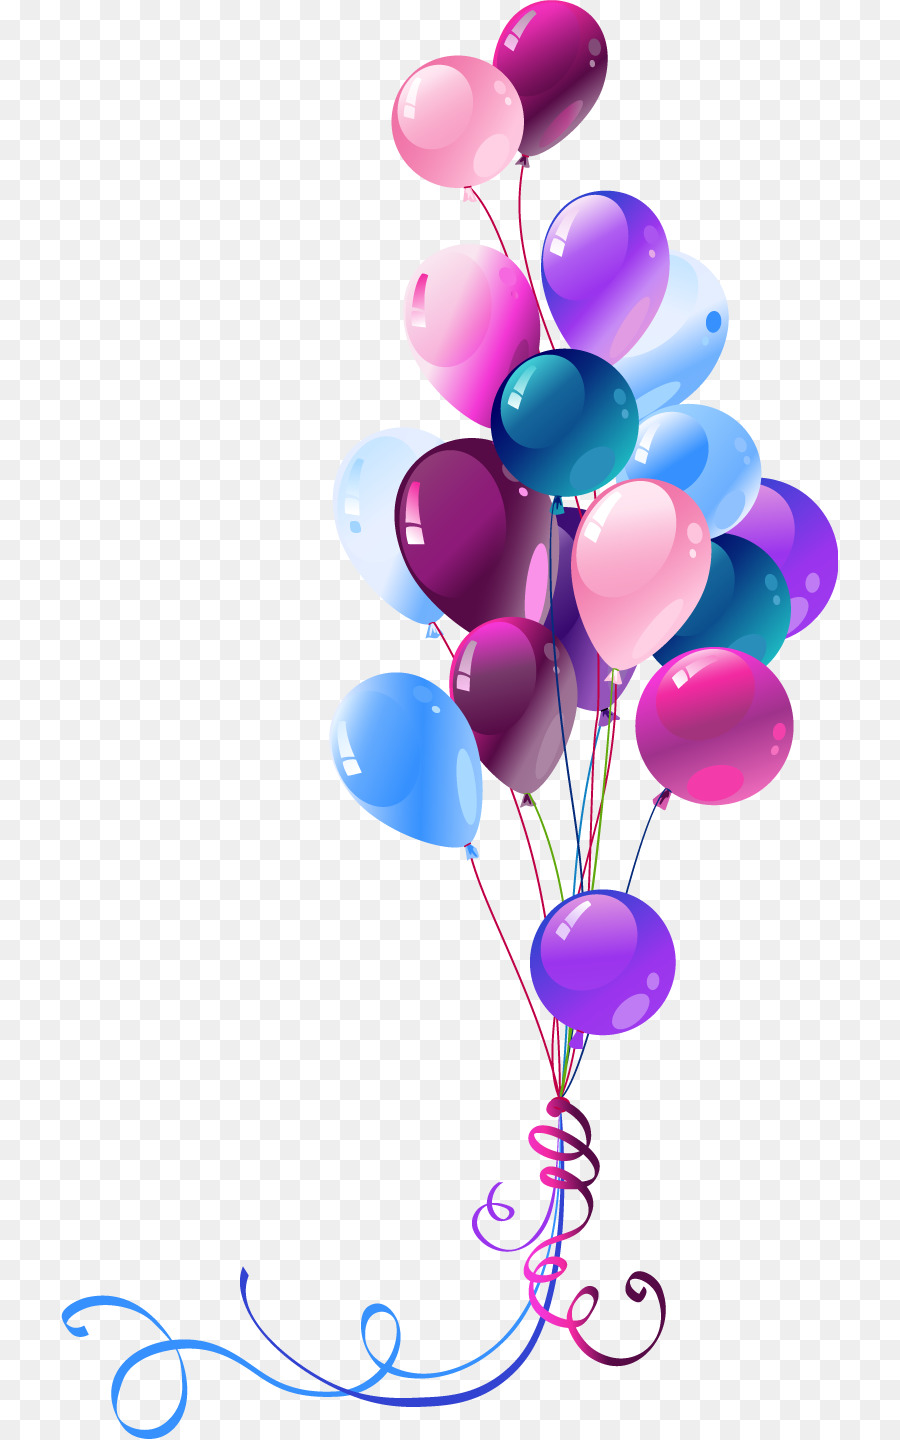 Happy Birthday to You Balloon Clip art - Ballons Png png download - 777*1439 - Free Transparent Birthday png Download.